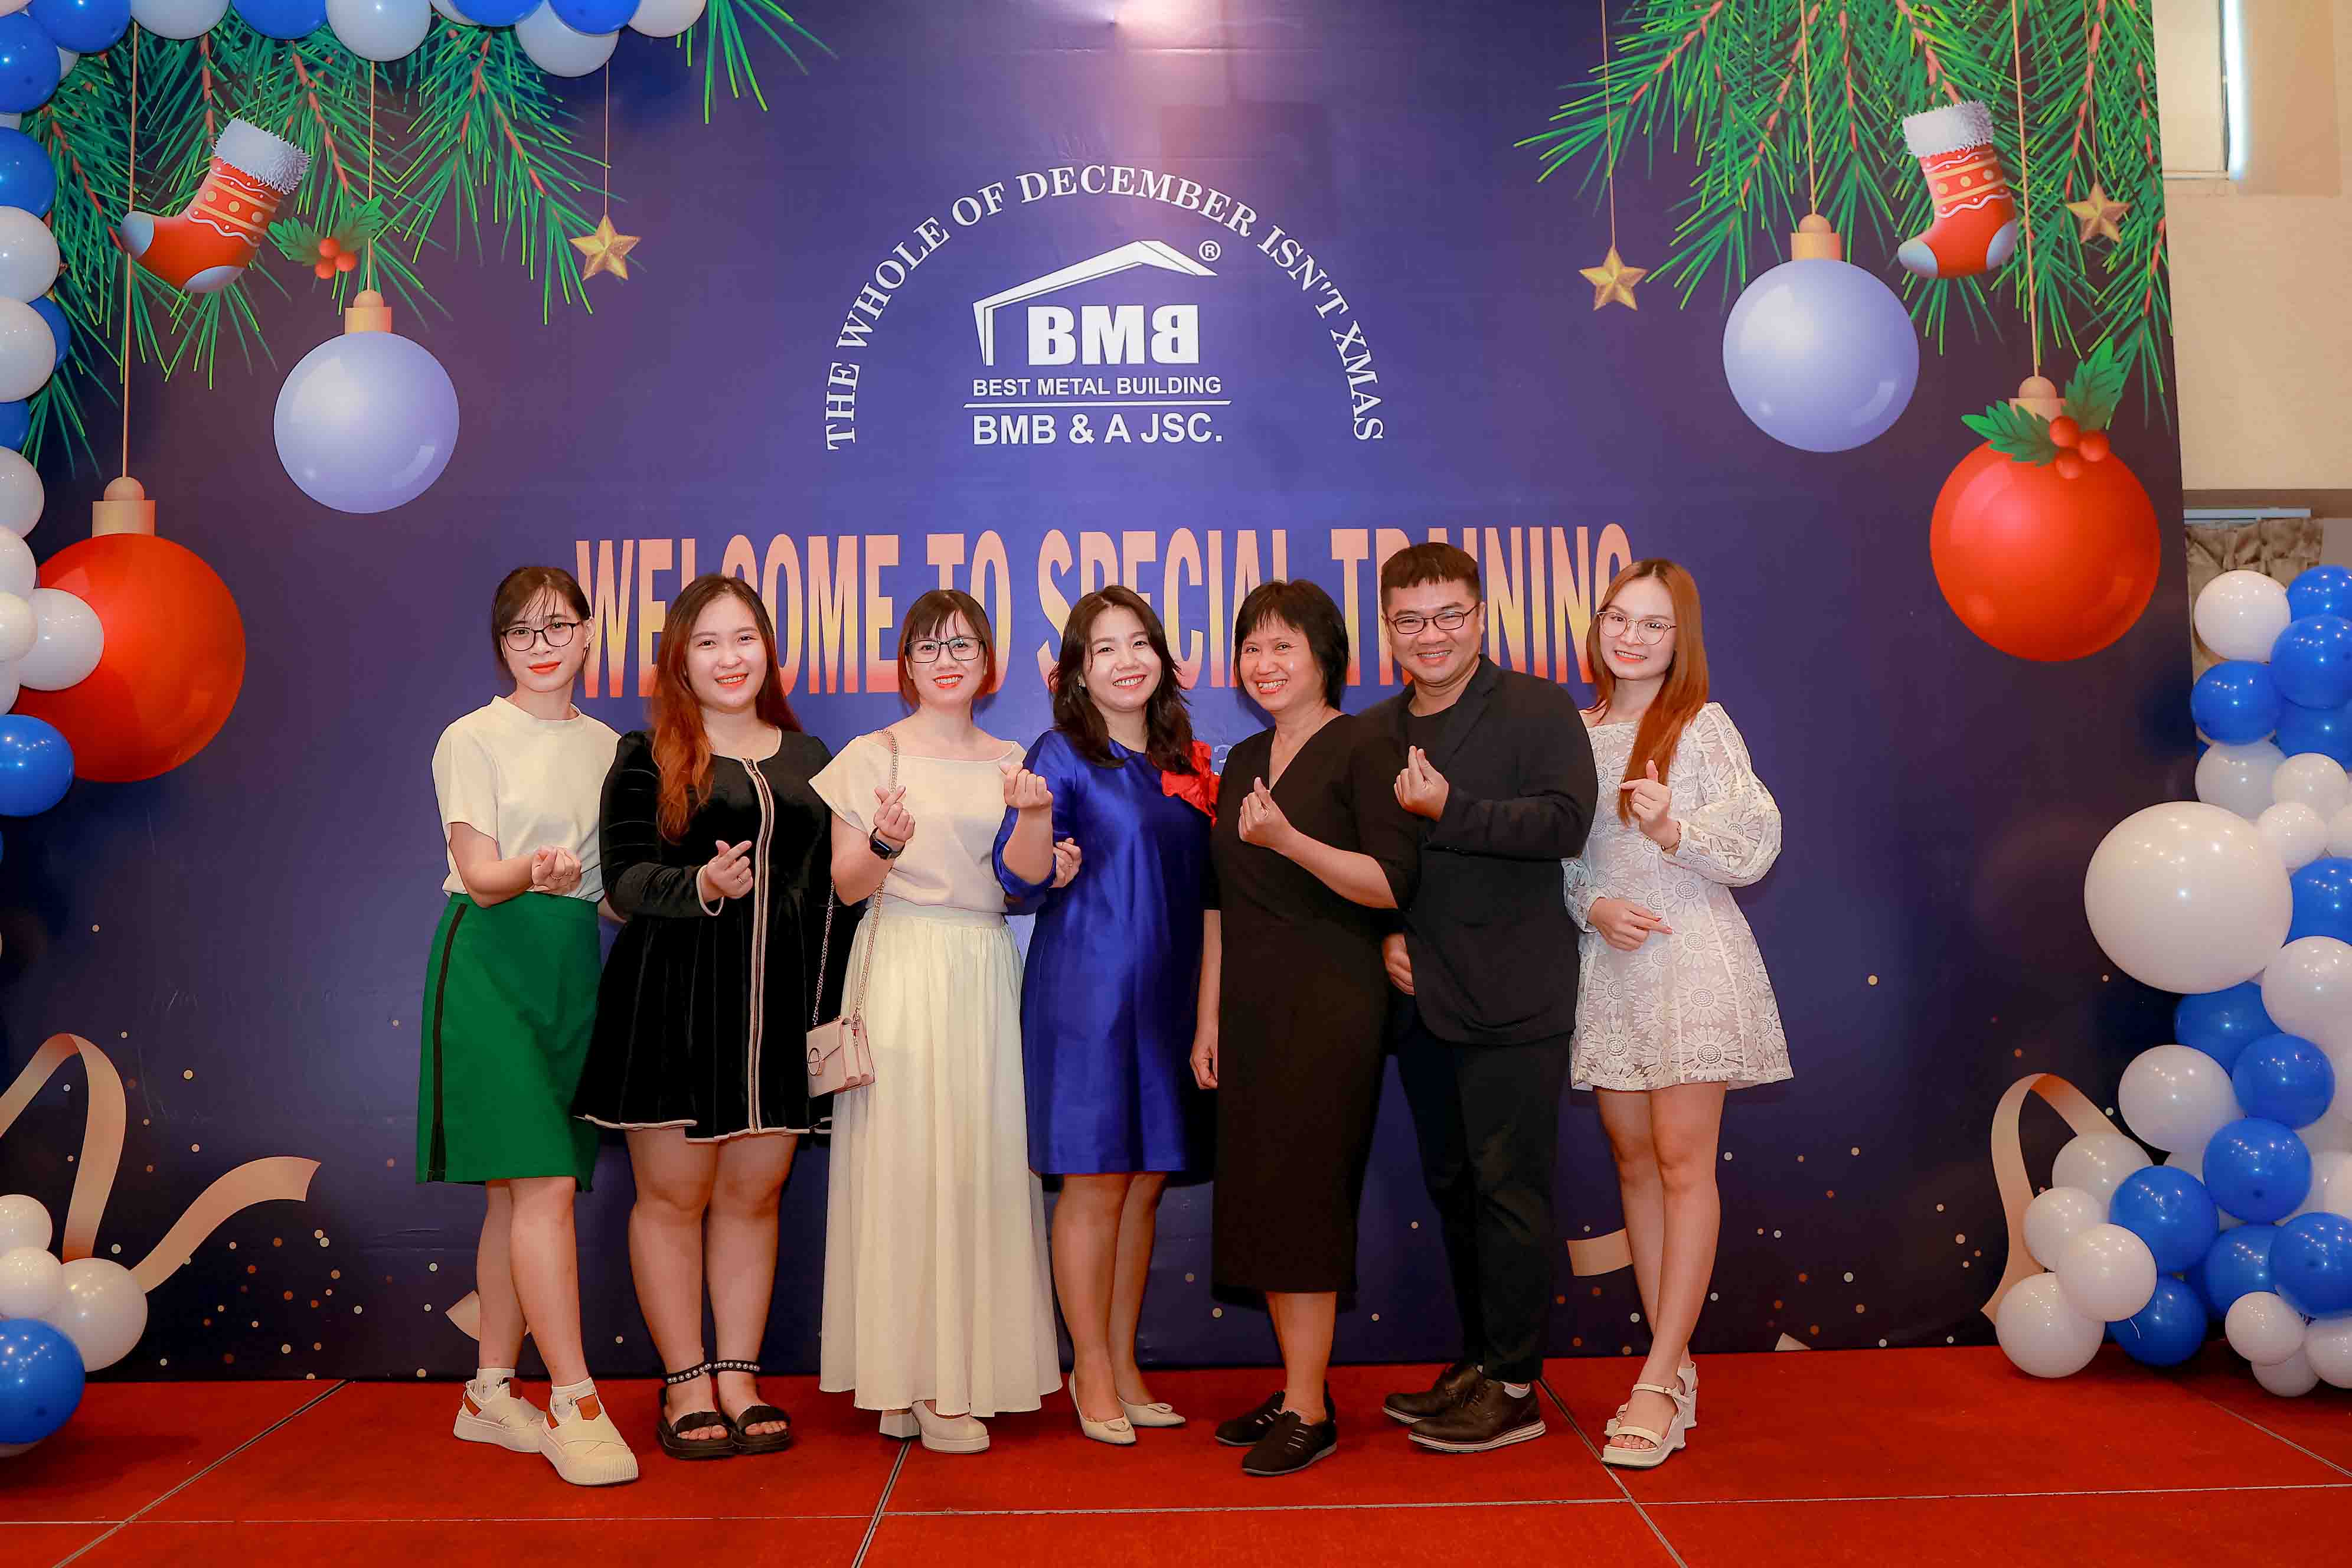 BMB STEEL celebrated Christmas and participated in internal training